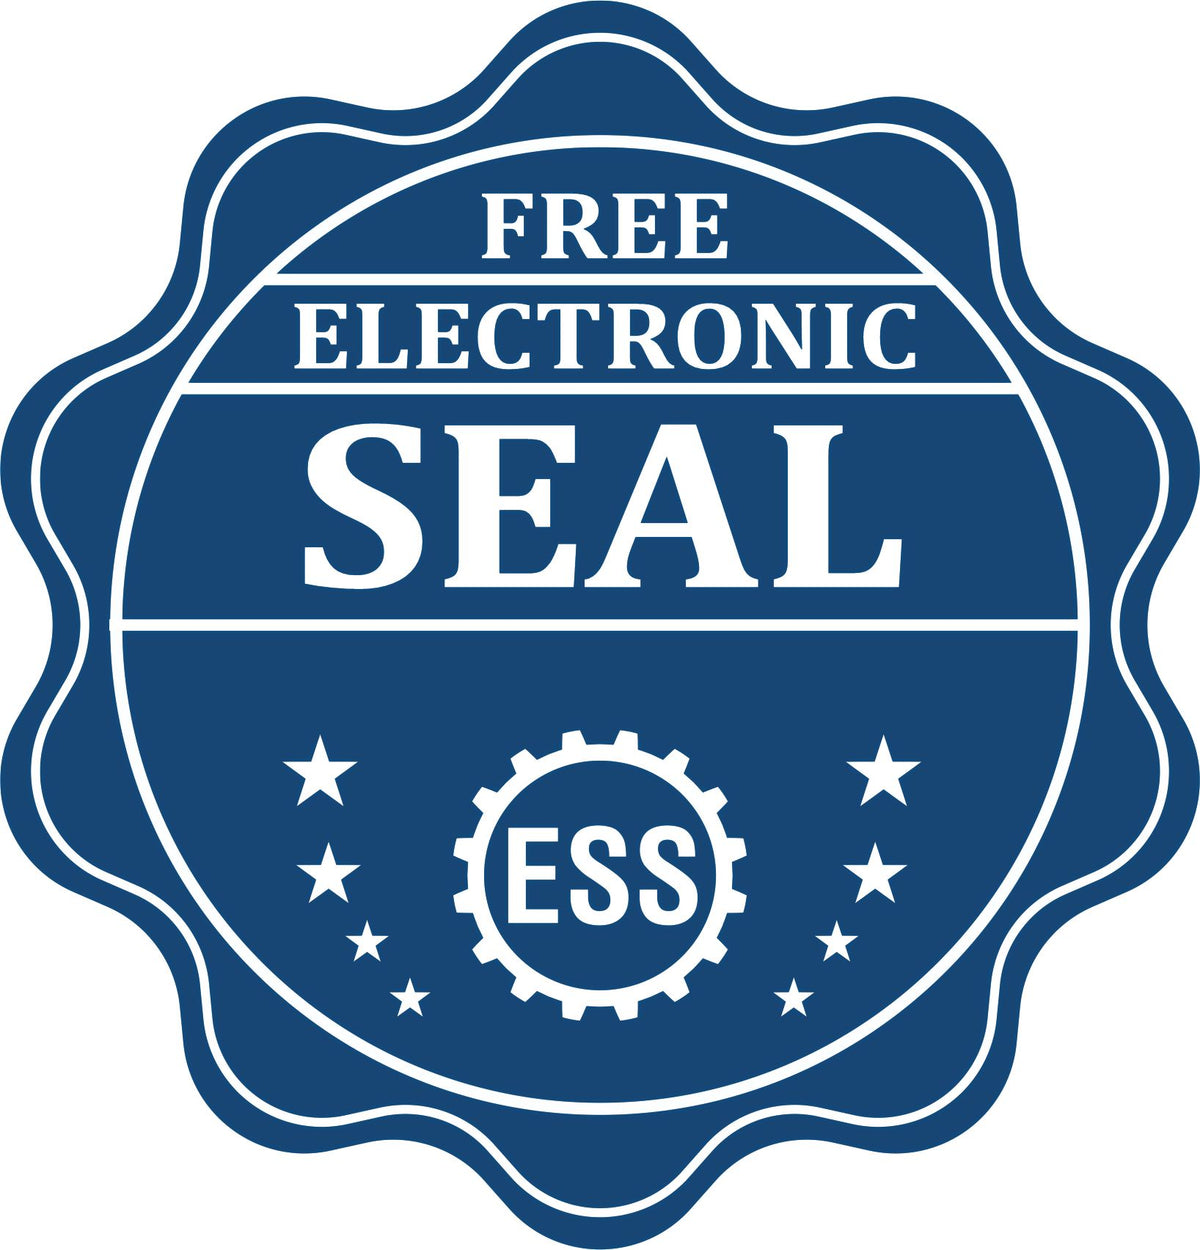 A badge showing a free electronic seal for the Gift North Carolina Landscape Architect Seal with stars and the ESS gear on the emblem.